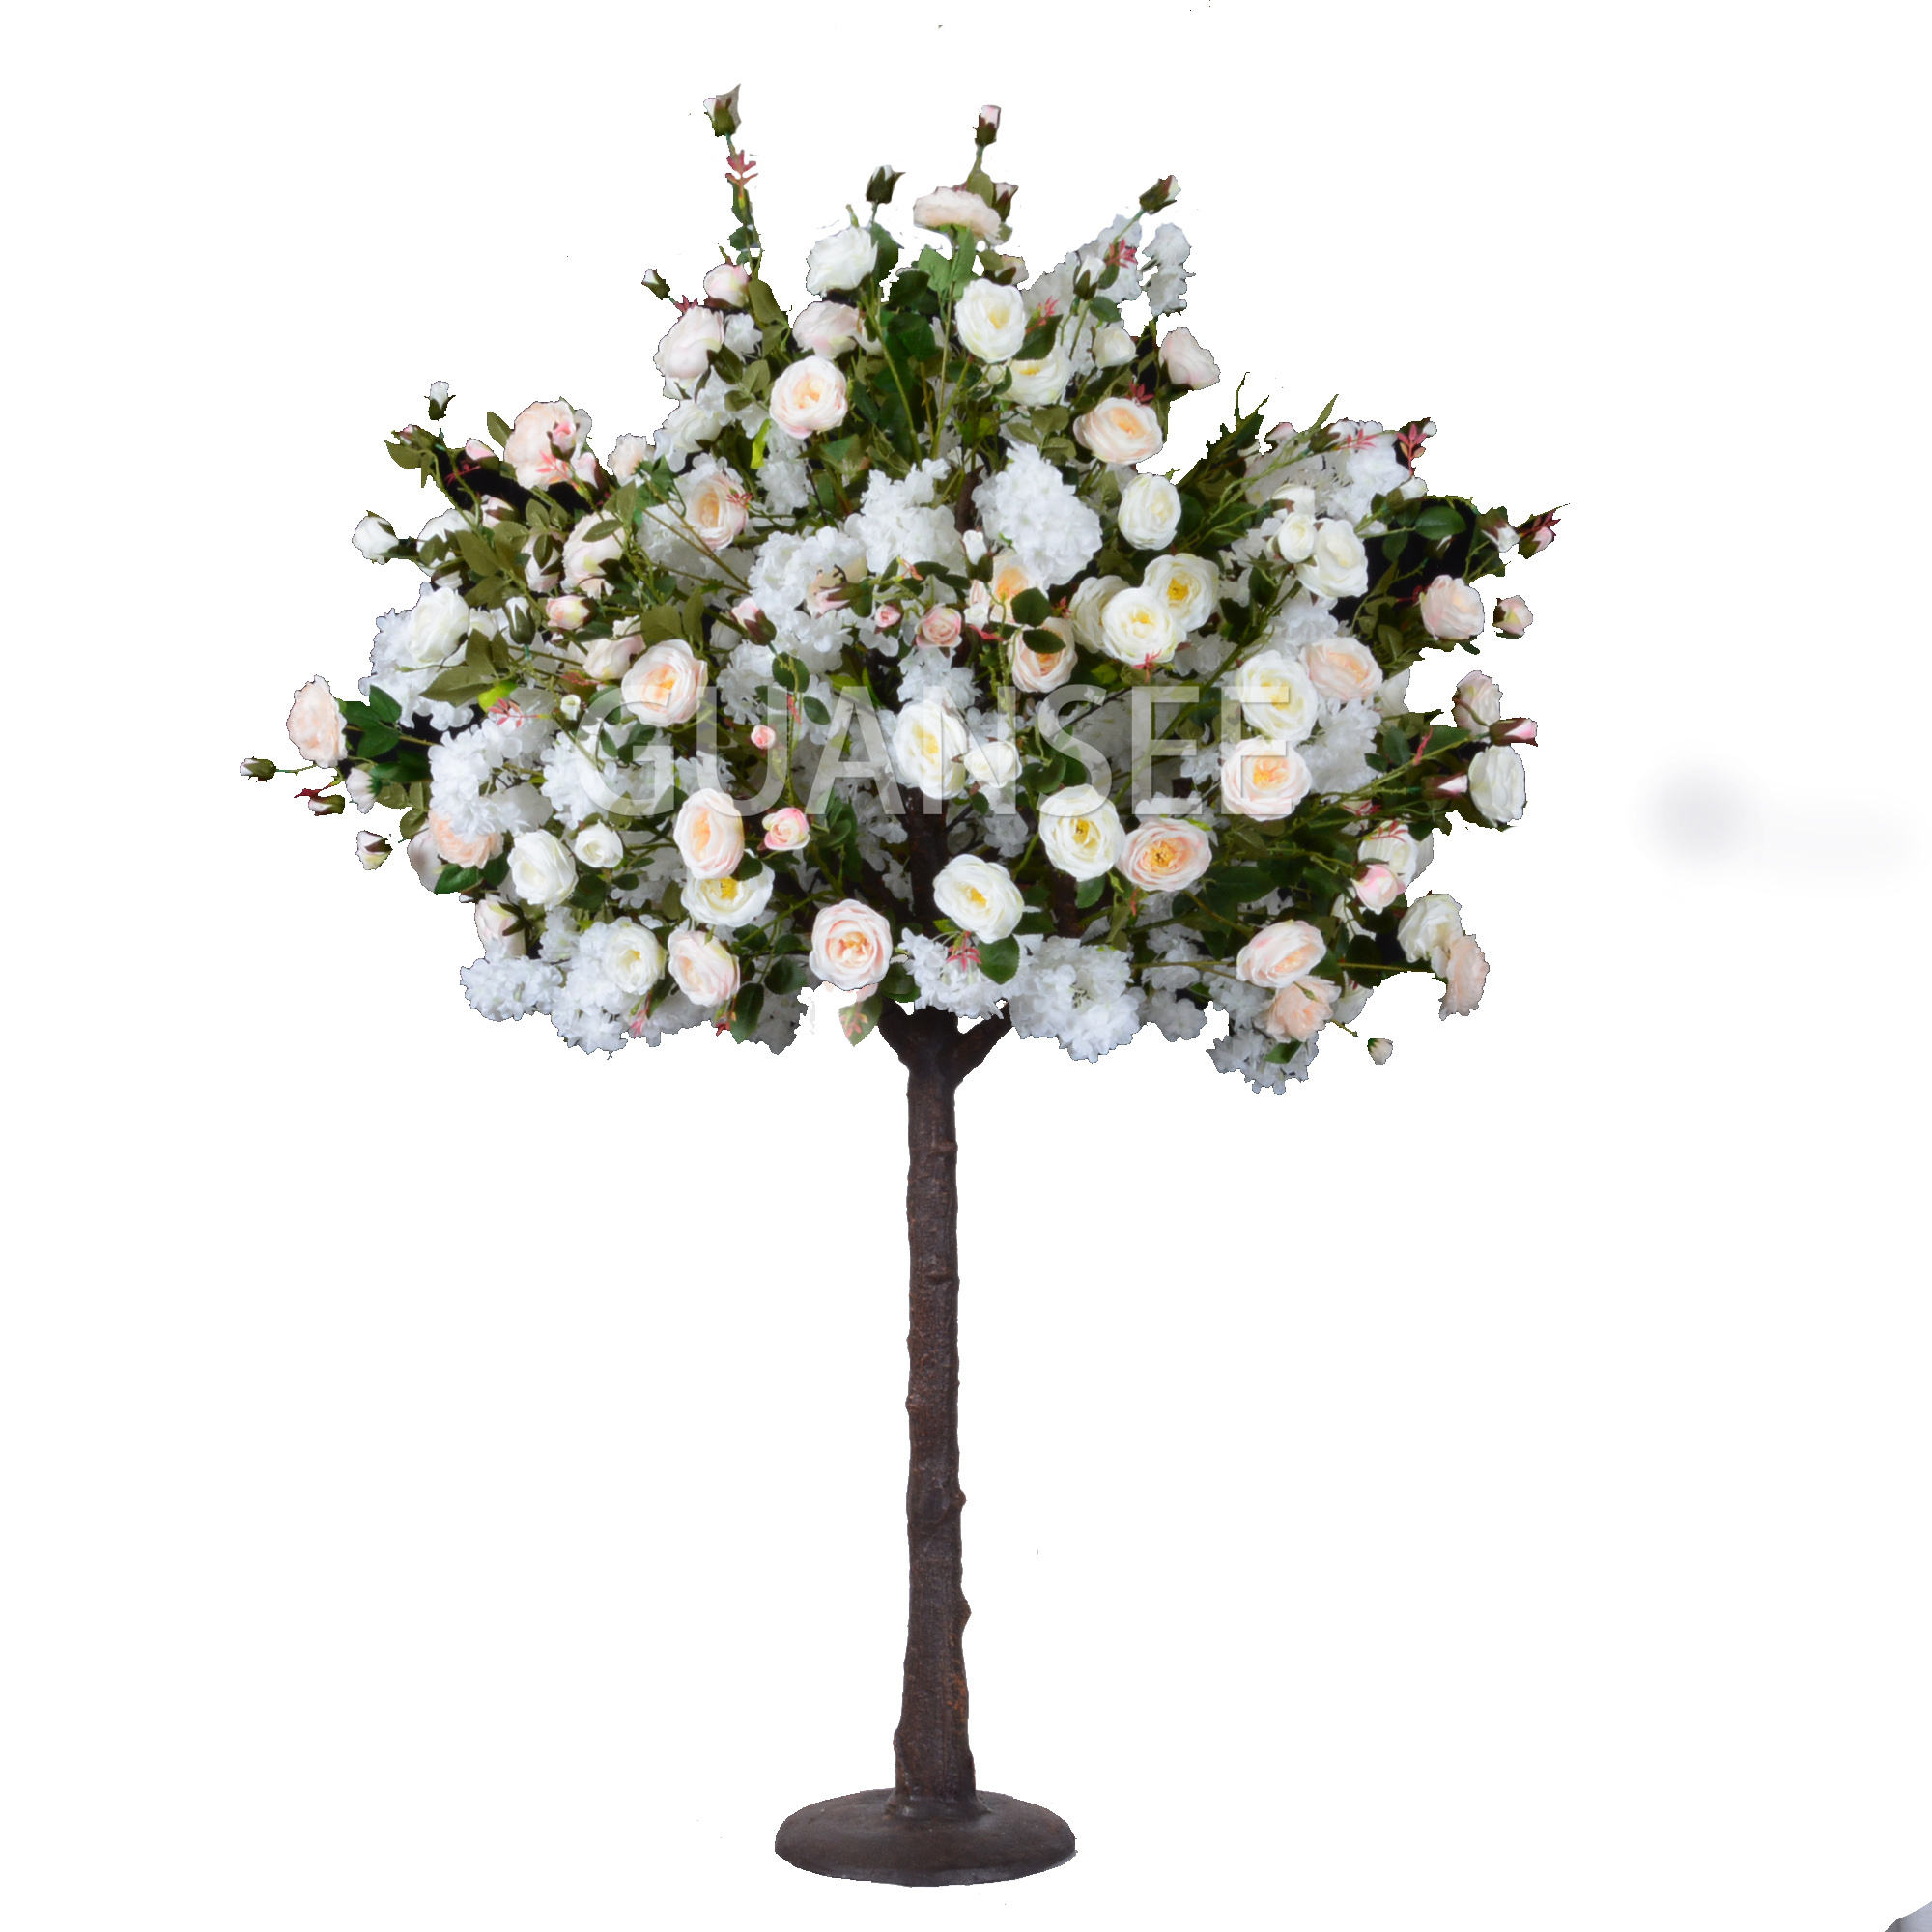 5ft Artificial peony tree mixed with cherry blossom flowers Indoor Artificial Flowers Tree Decor Wedding